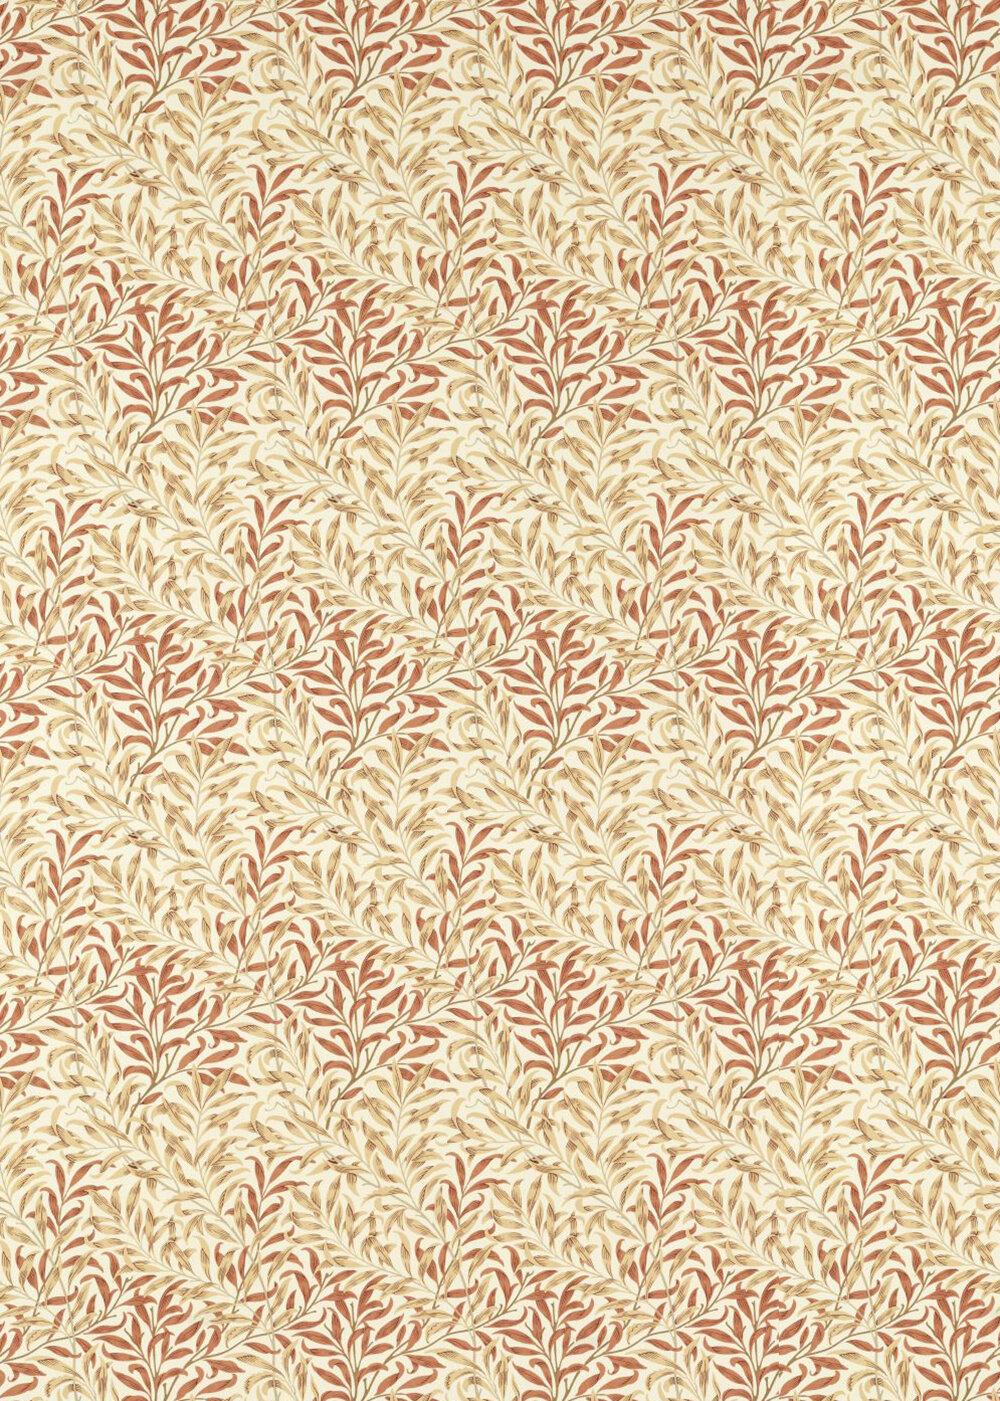 Willow Bough Fabric - Russet / Wheat - by Morris